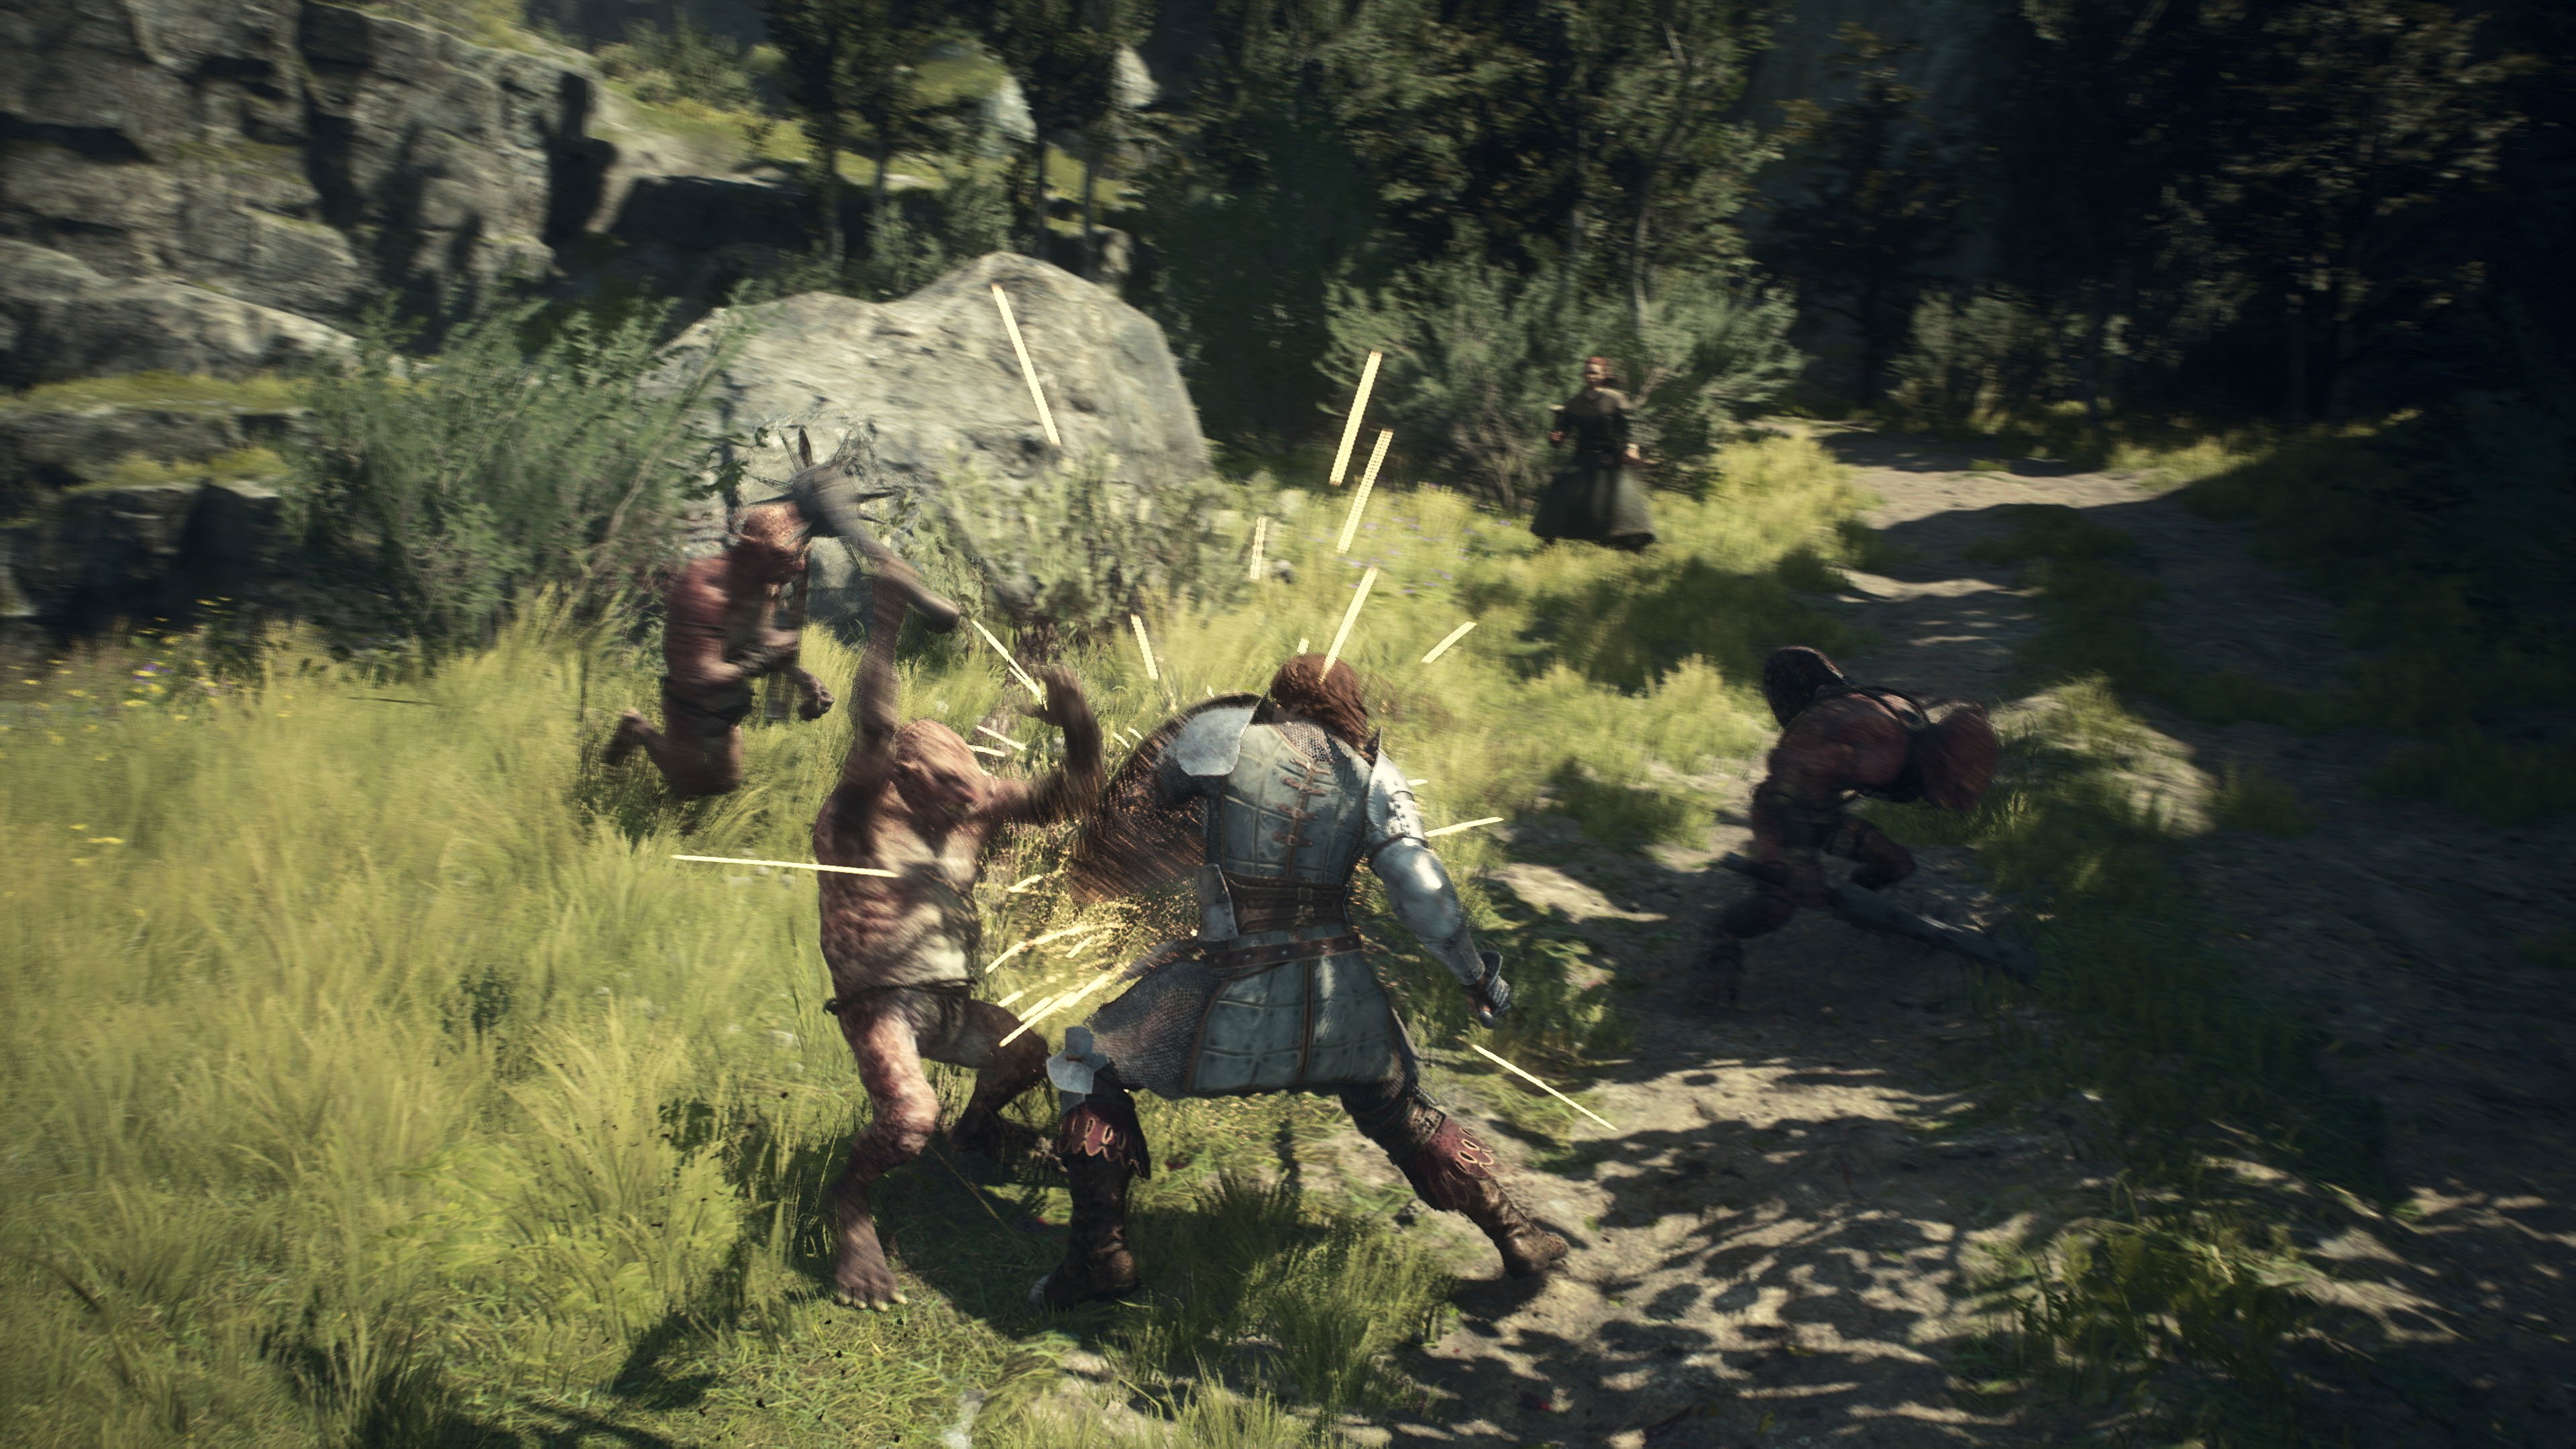 Possible Dragon's Dogma 2 Release Date Leaked Online